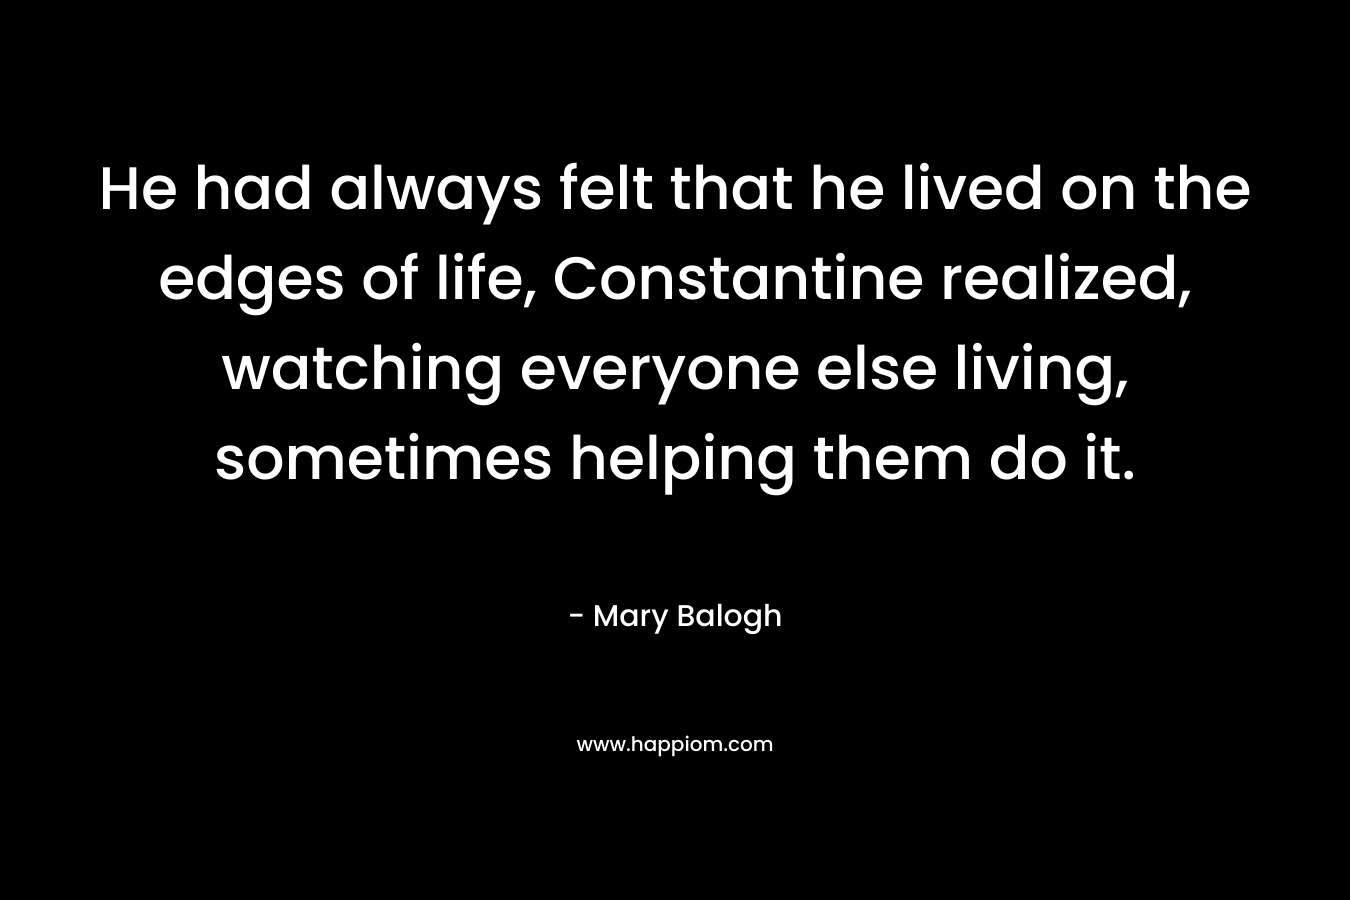 He had always felt that he lived on the edges of life, Constantine realized, watching everyone else living, sometimes helping them do it. – Mary Balogh